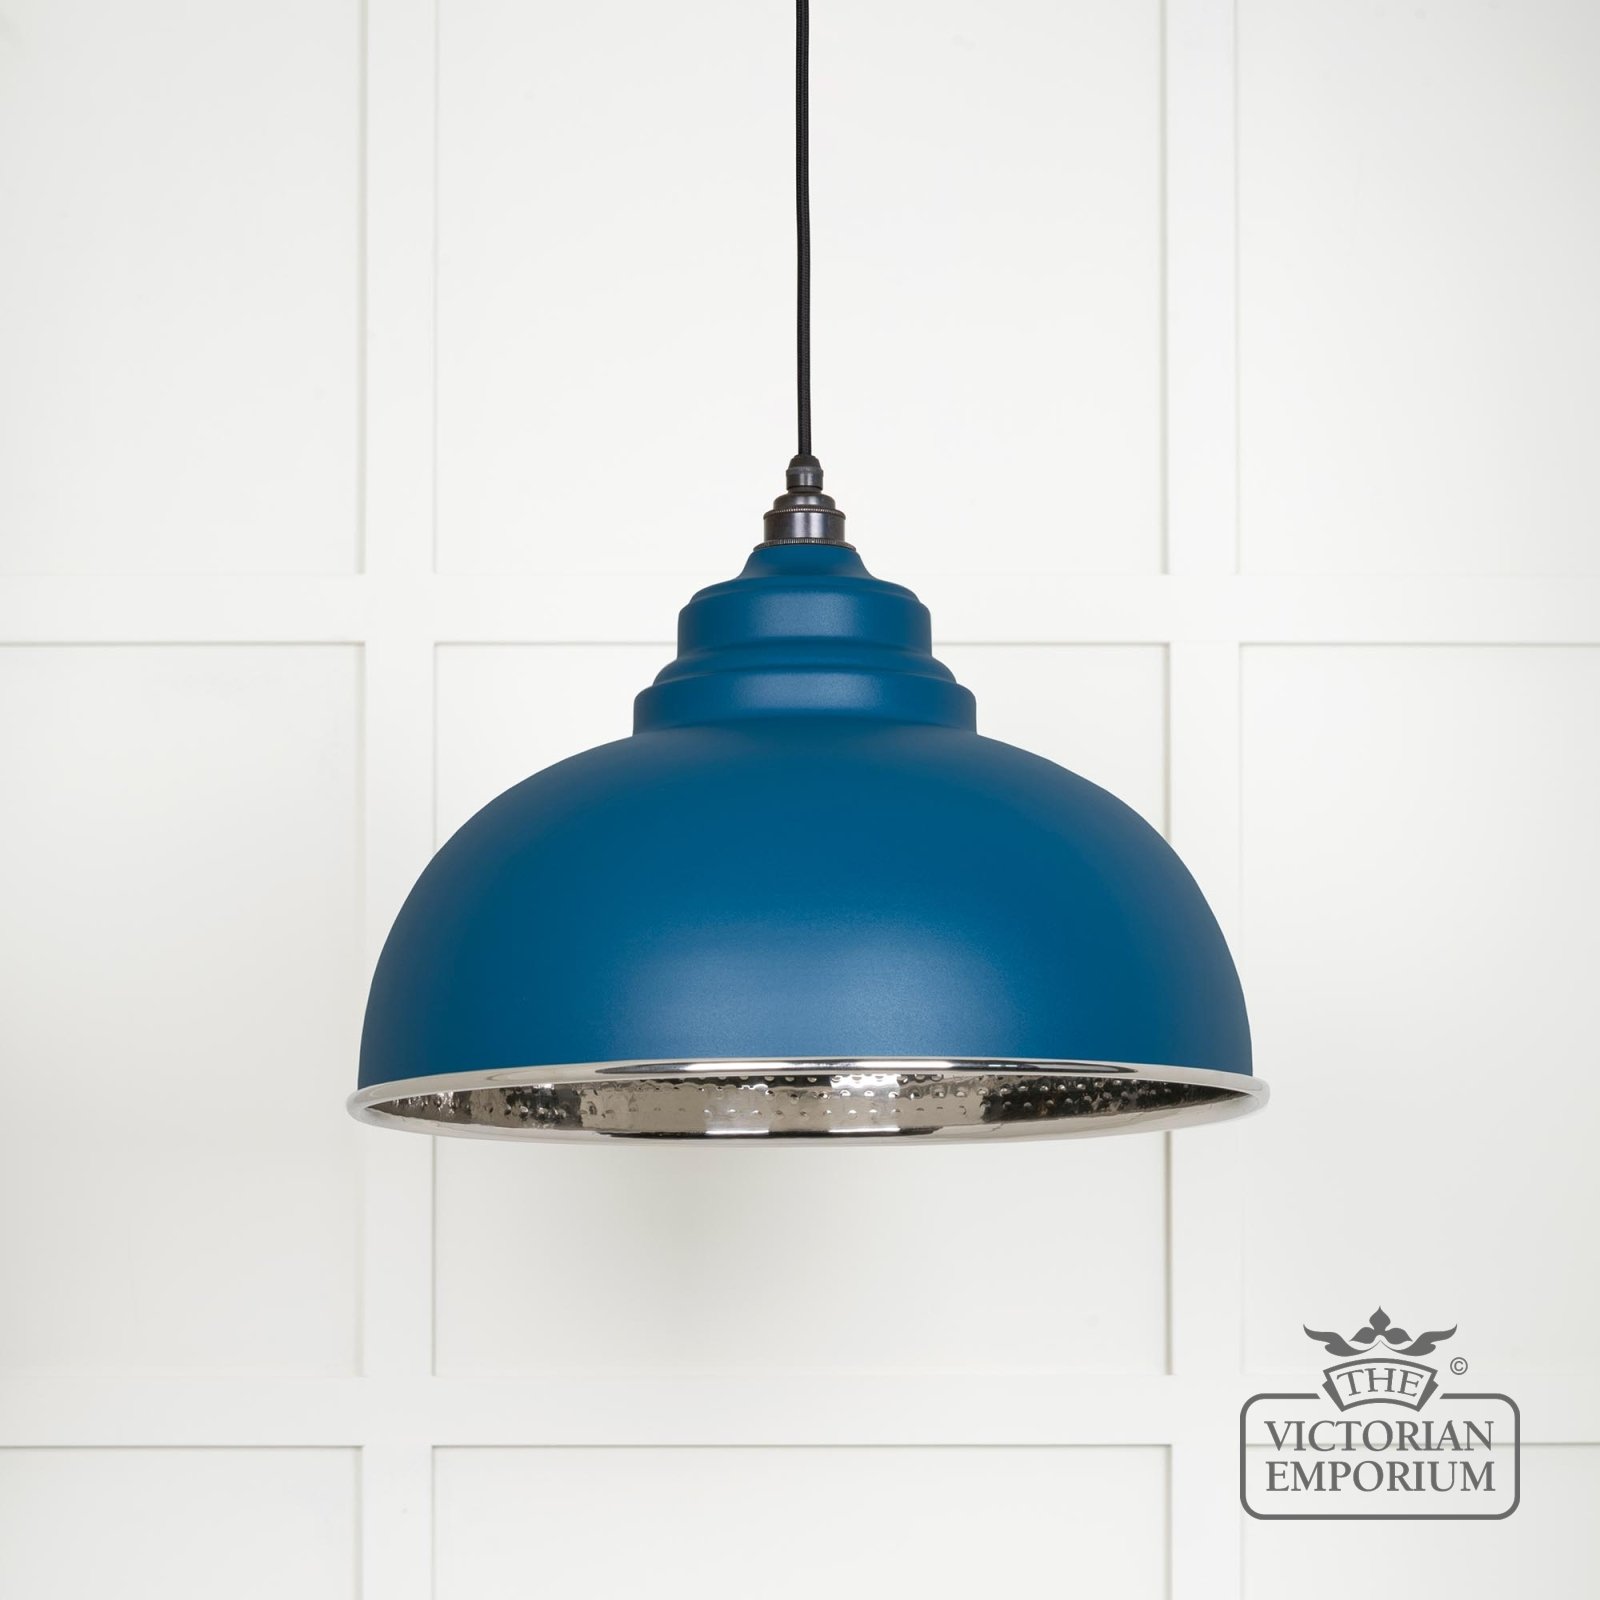 Harlow pendant light in hammered nickel with upstream exterior